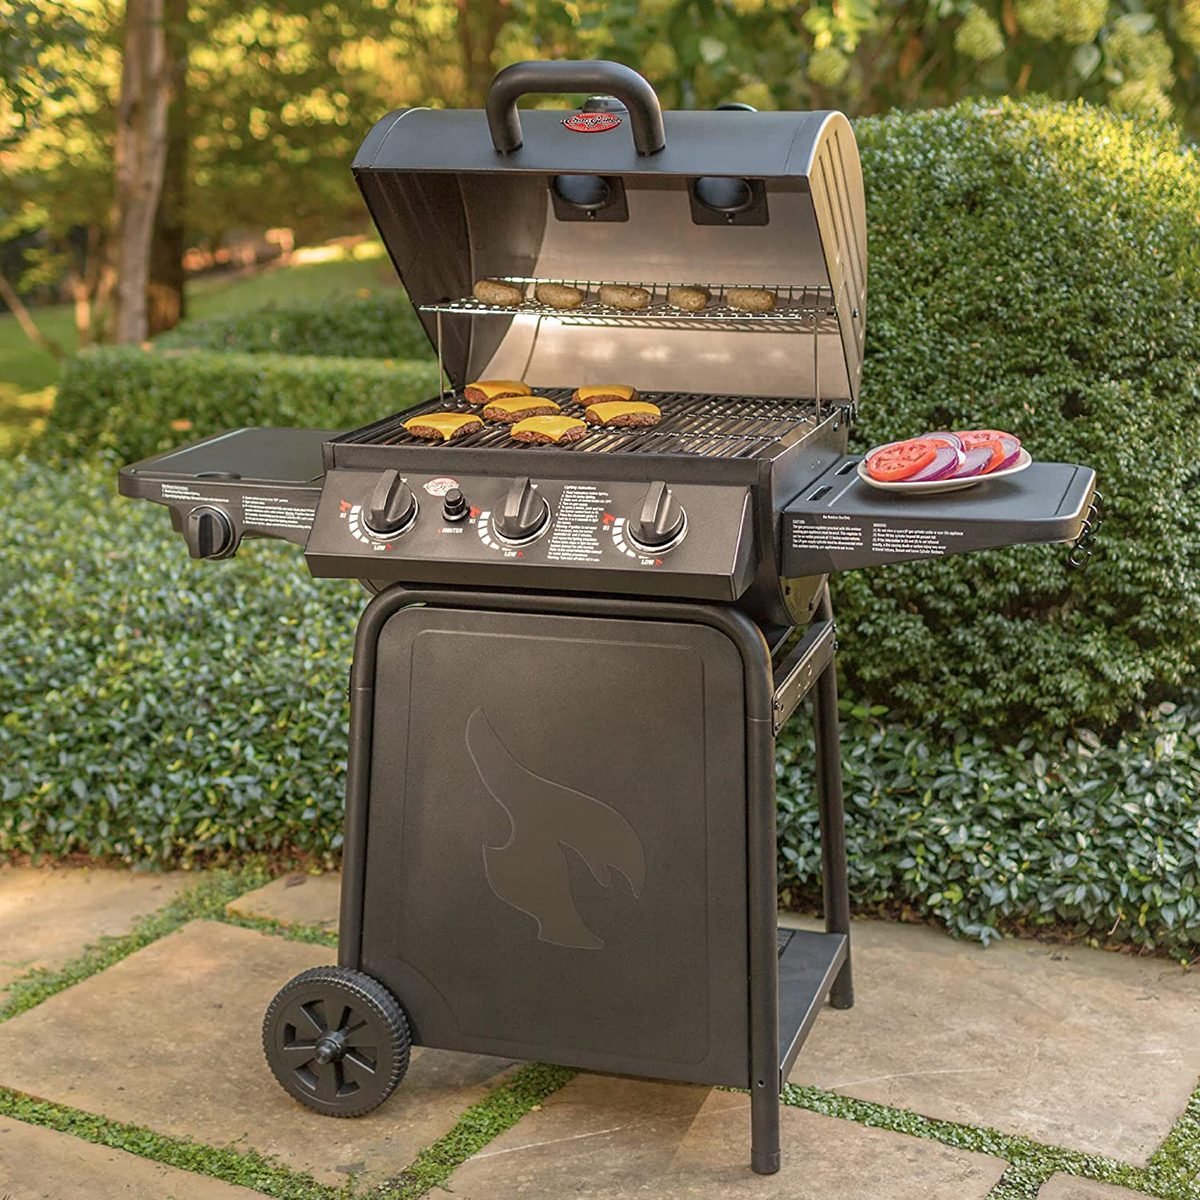 The 15 Best-Reviewed Amazon Gas Grills for Outdoor Cooking